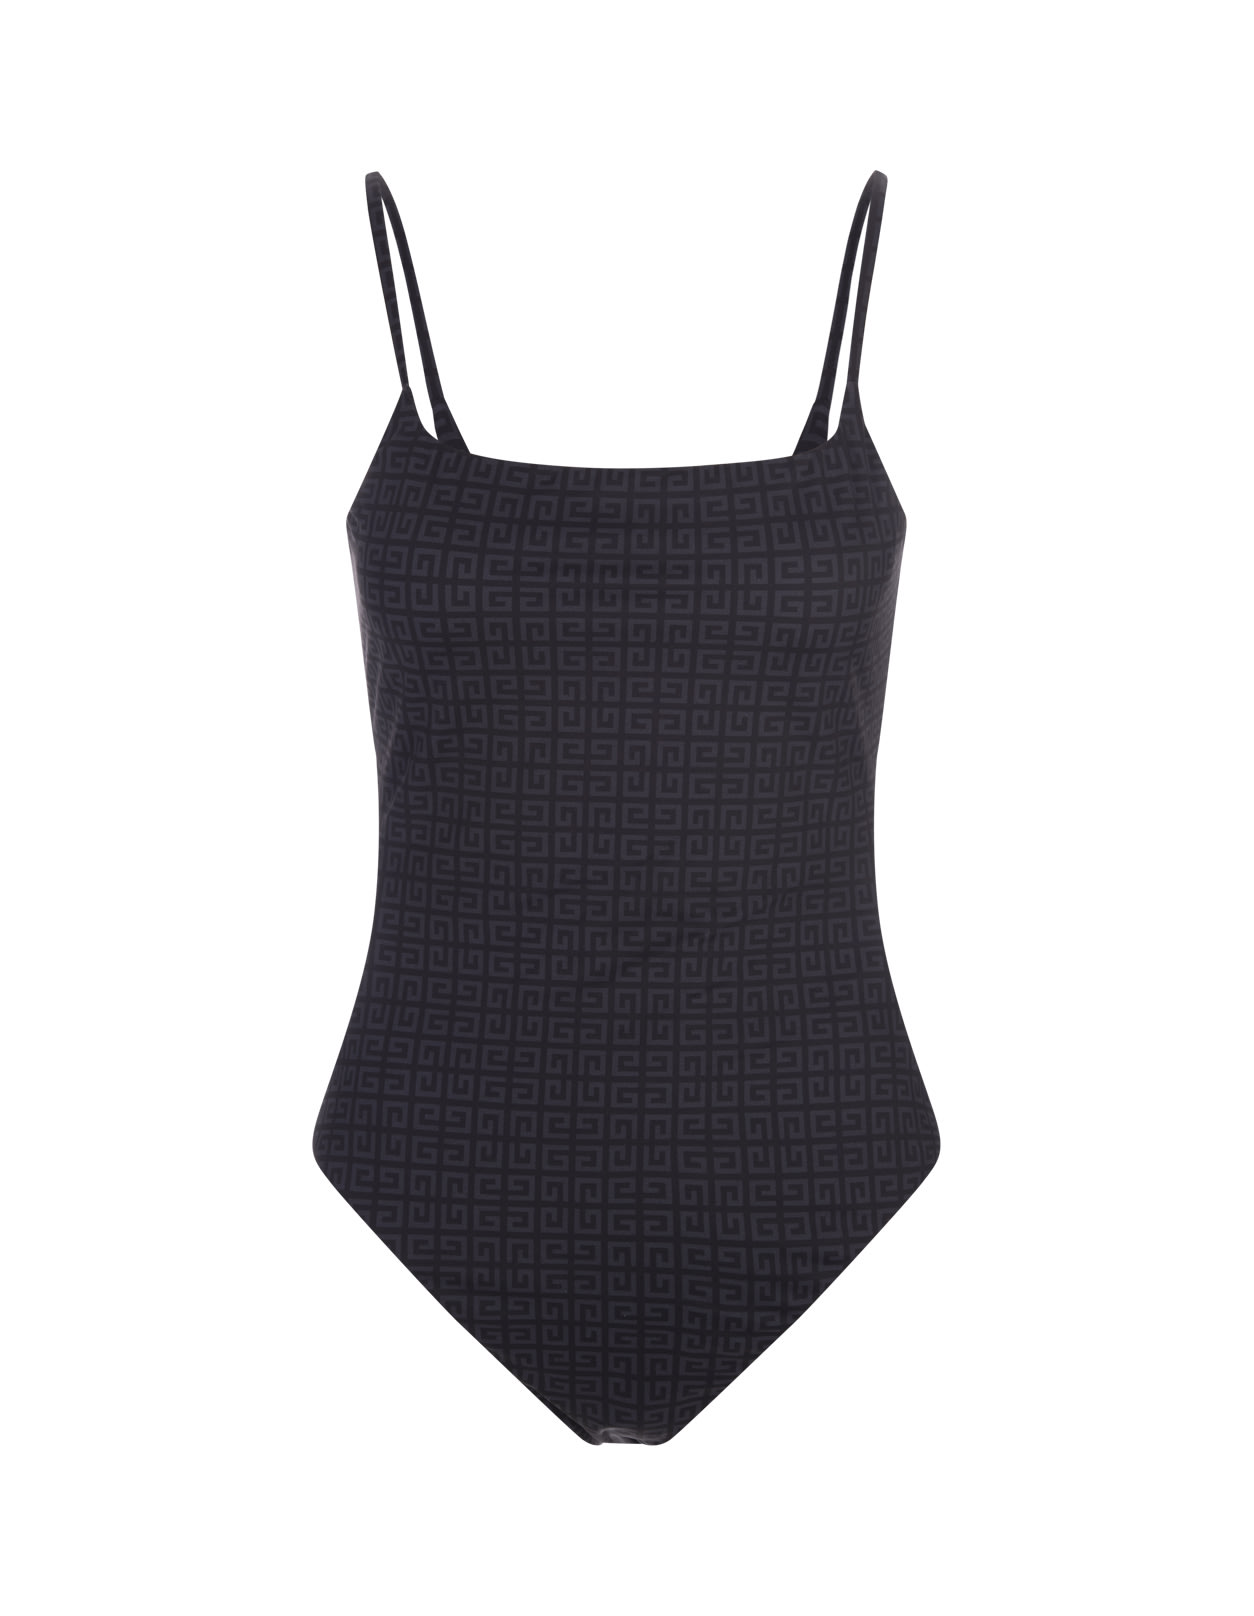 GIVENCHY BLACK ONE PIECE SWIMSUIT IN 4G RECYCLED NYLON